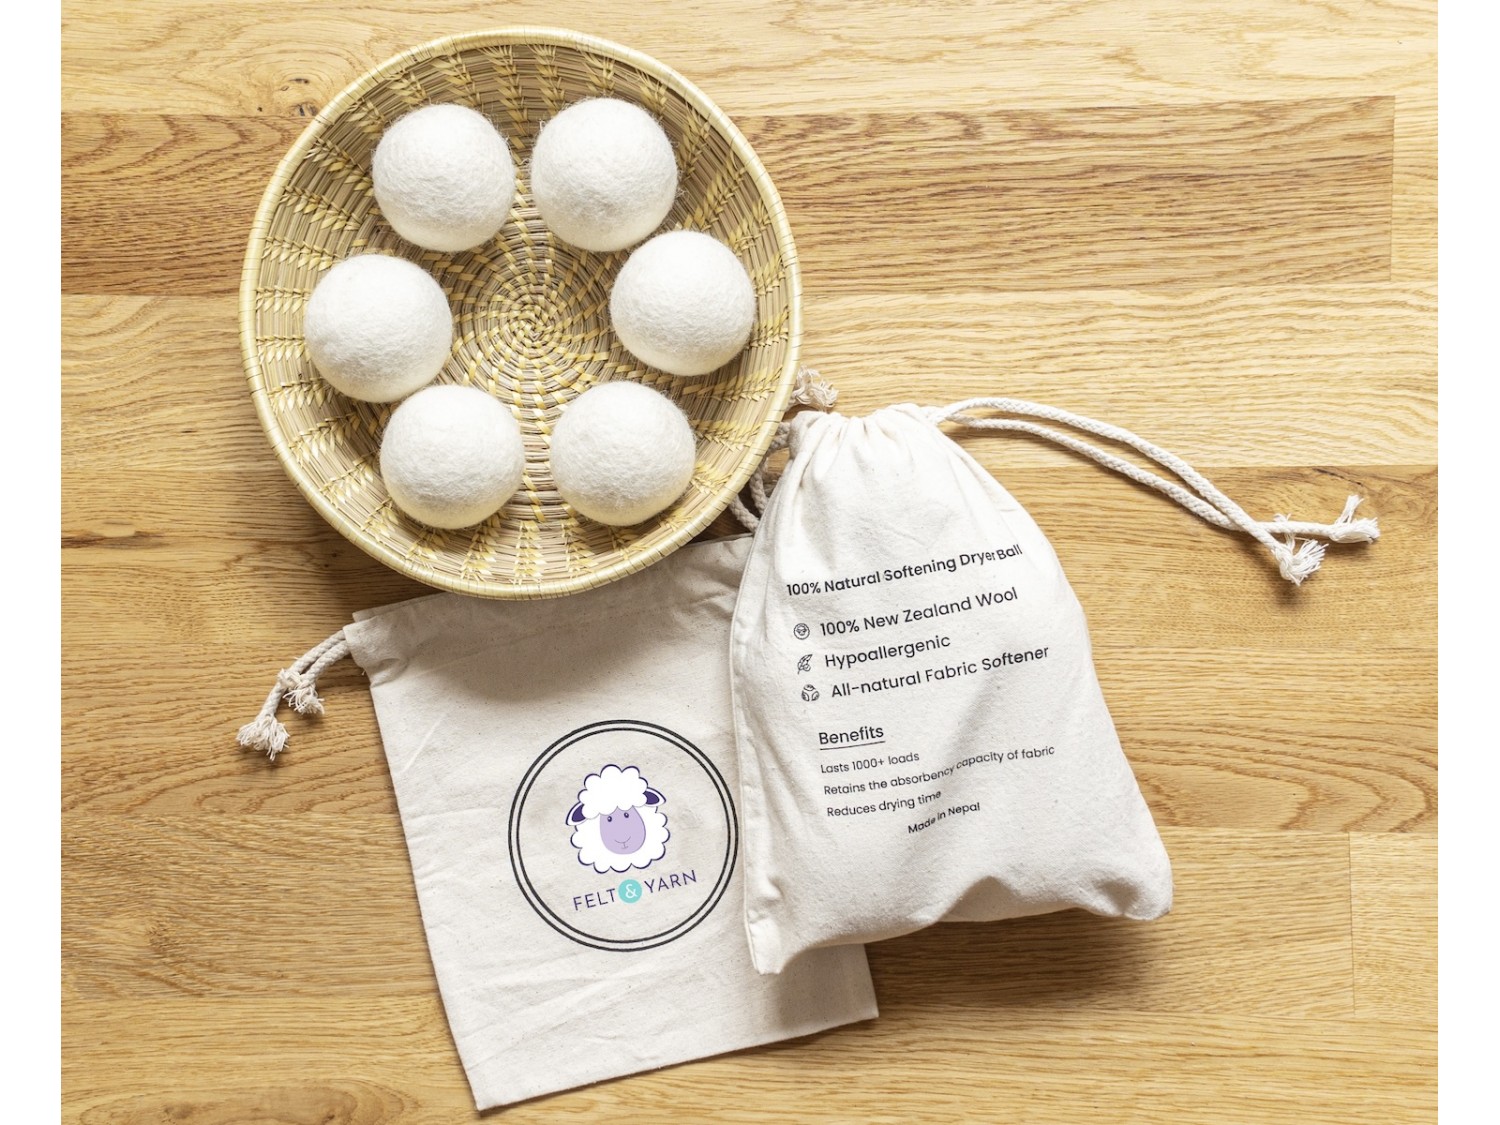 Re-usable Wool Dryer Balls - Natural Fabric Softener